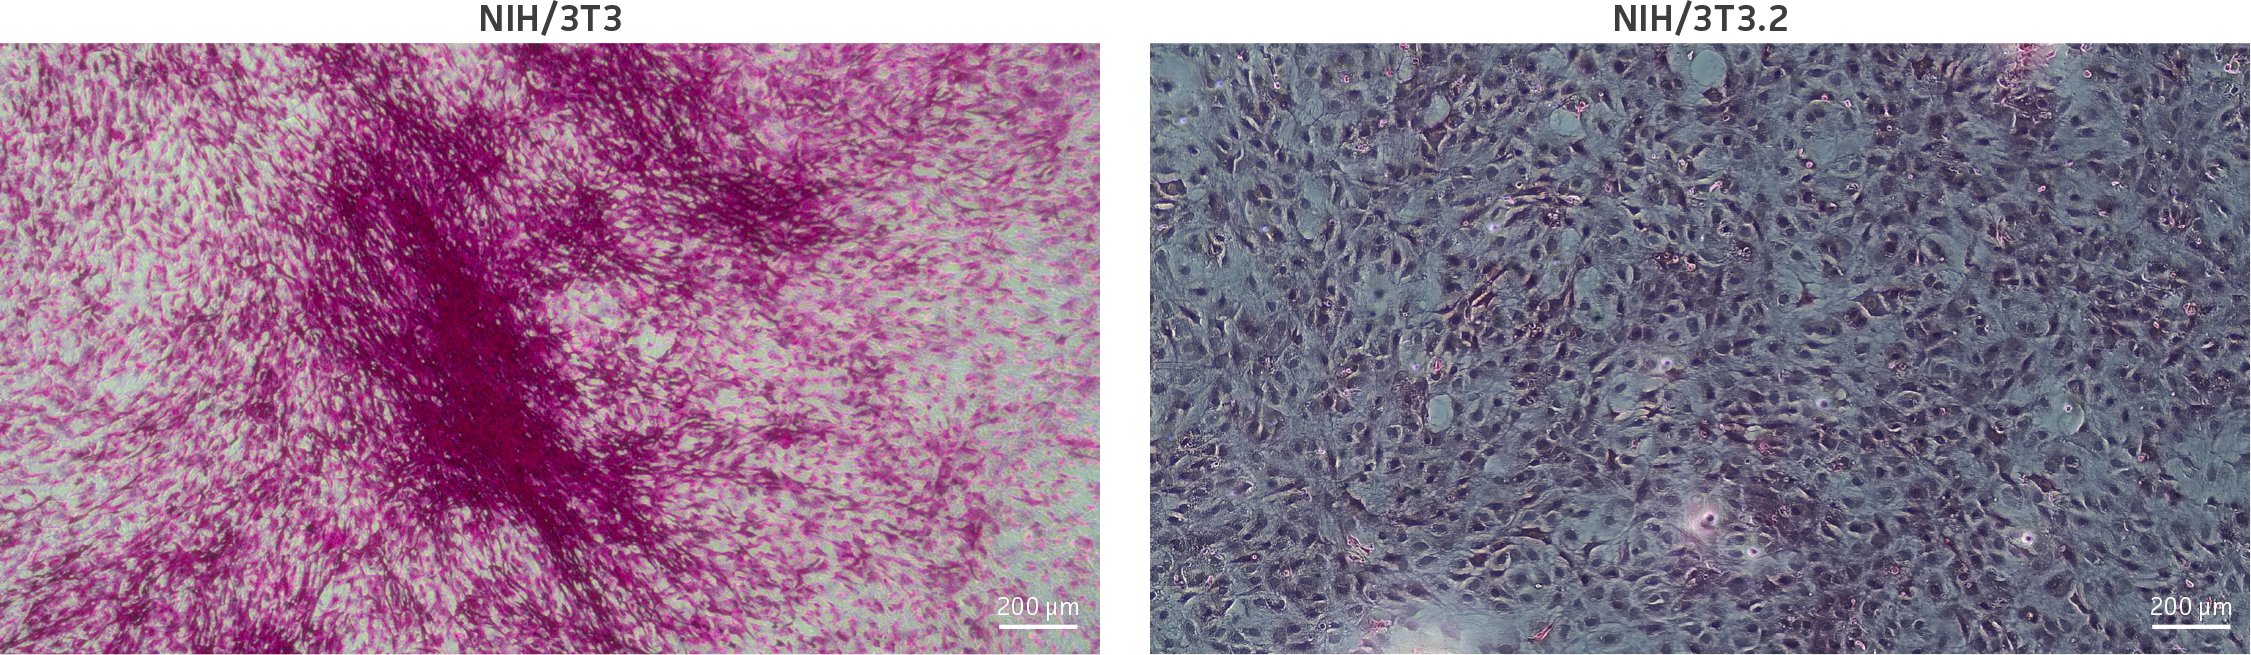 Evaluation of growth foci in parental and clonal derivative cells following carbol-fuchsin staining. The parental NIH/3T3 cell line demonstrated high evidence of foci formation. The NIH/3T3.2 clonal derivative presented here demonstrated negative growth foci.